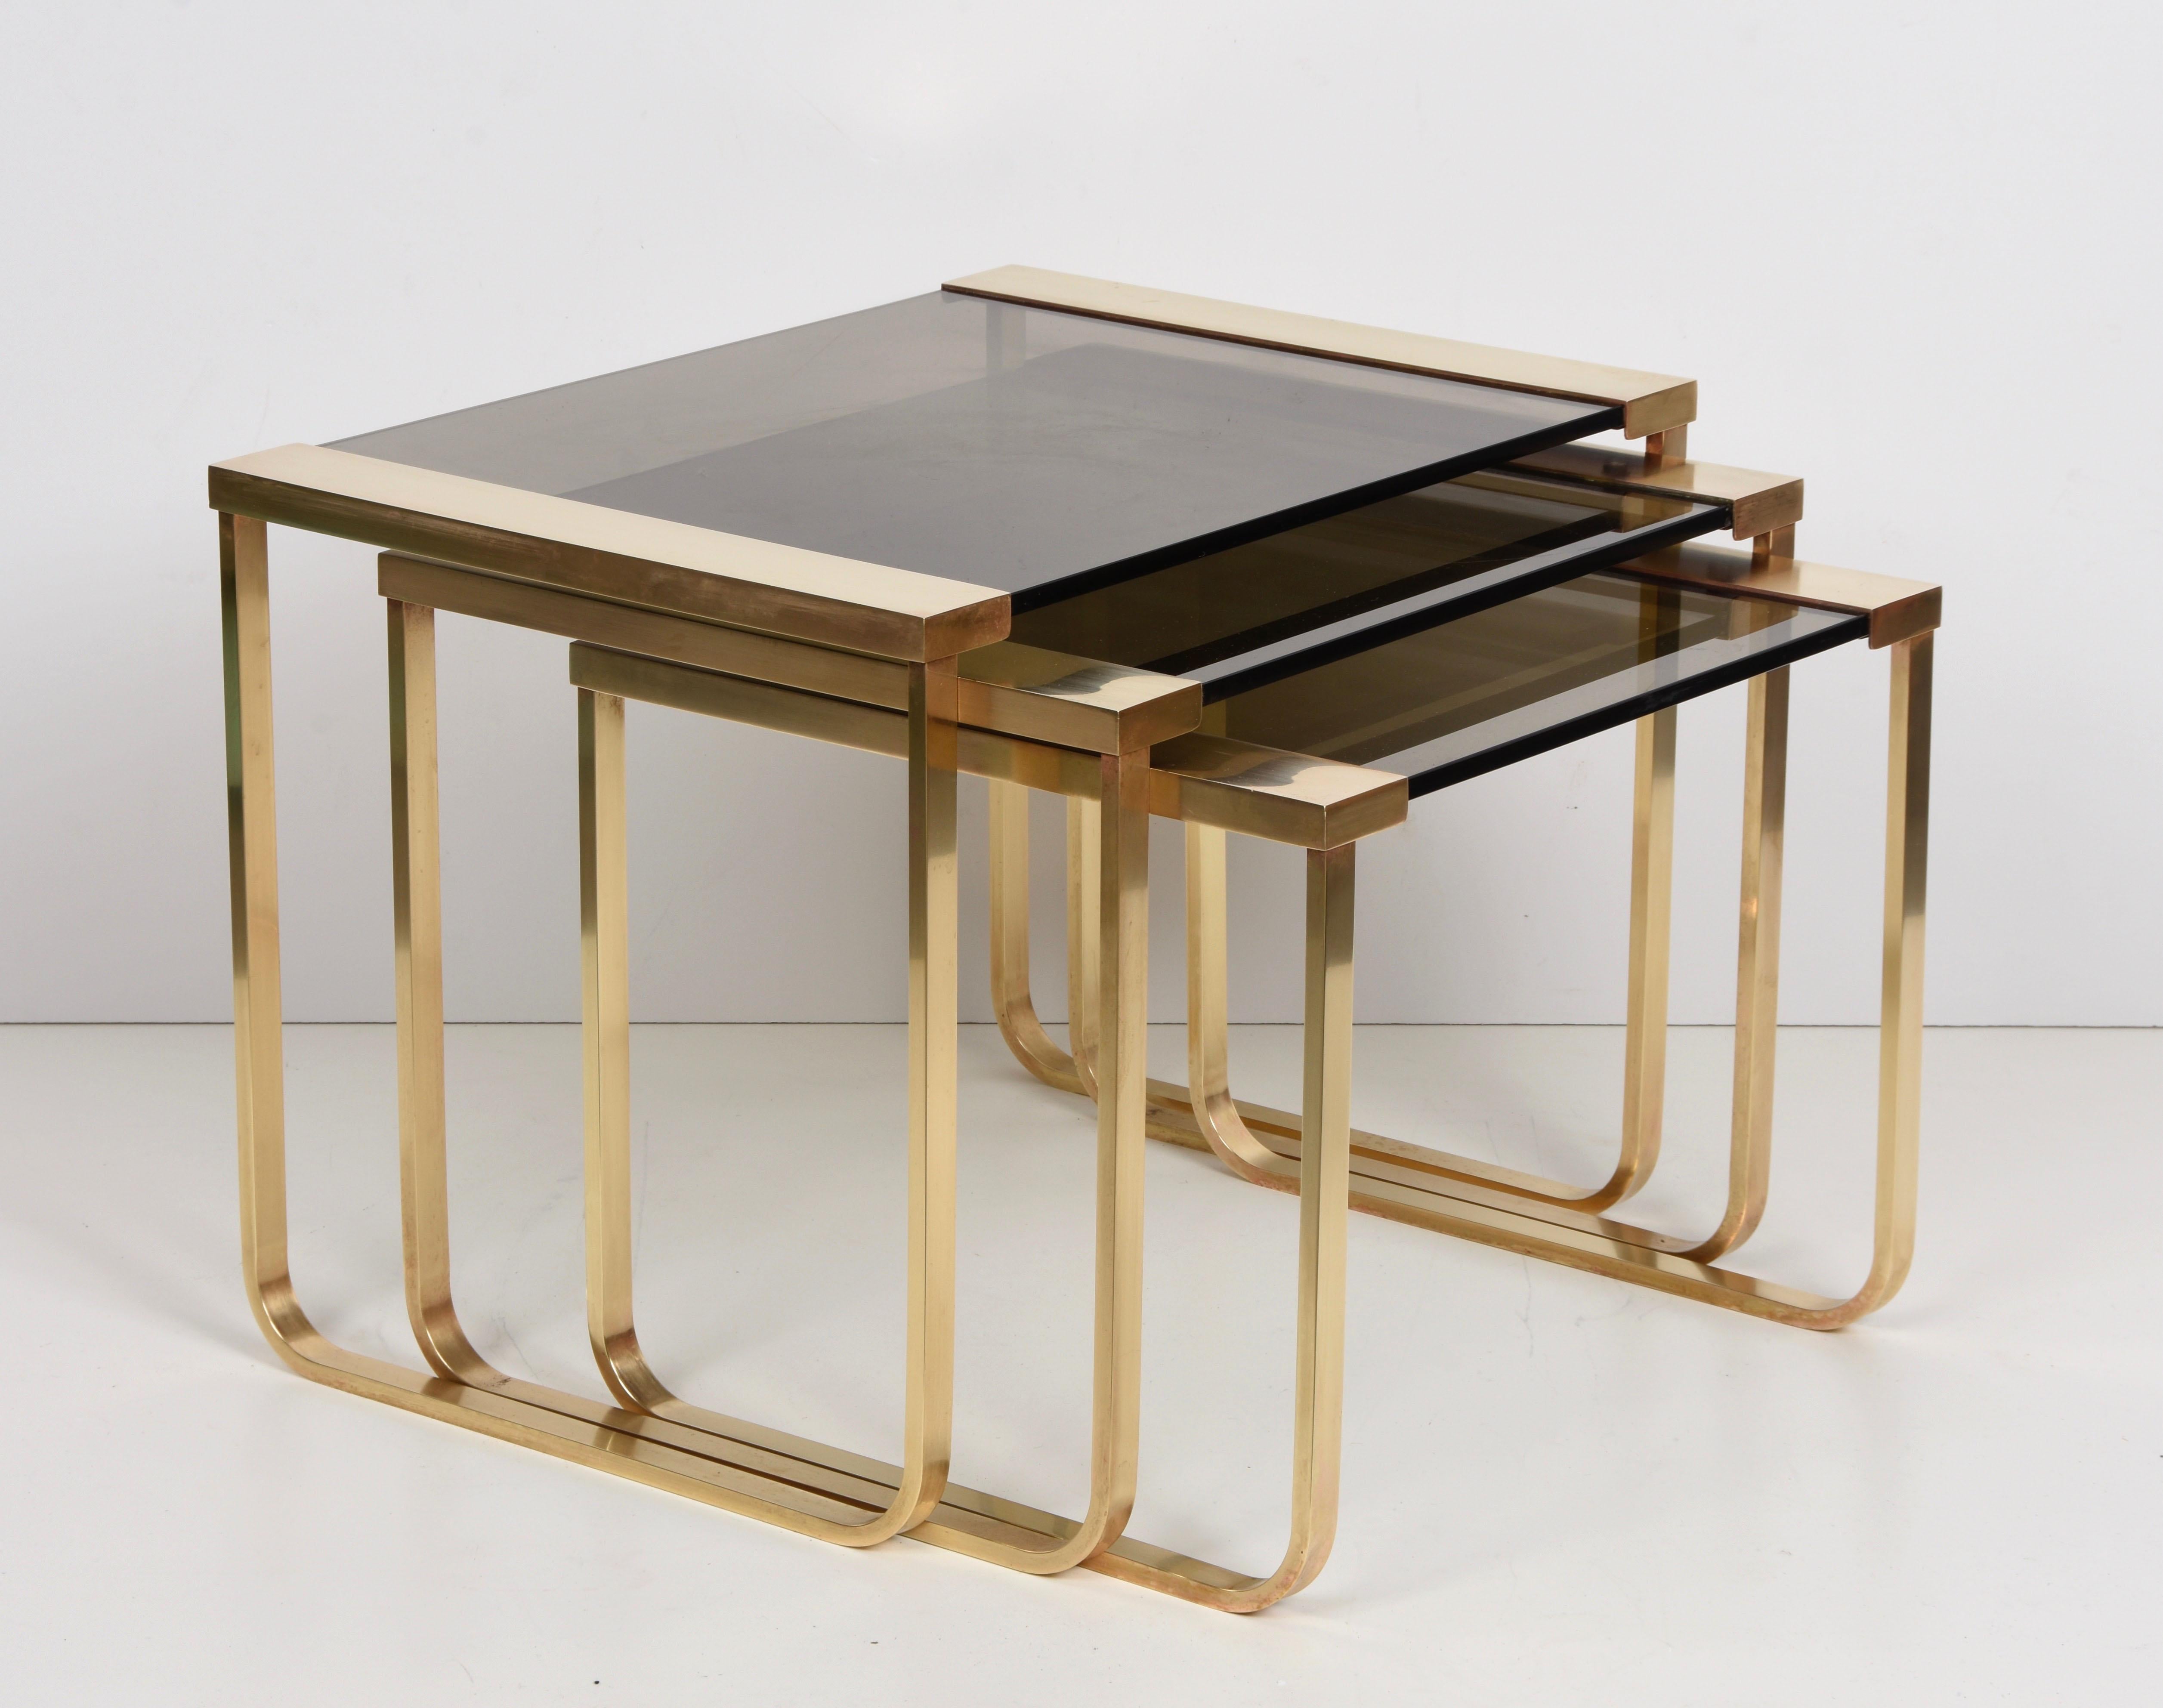 Amazing set of three interlocking tables in brass and smoked glass. This beautiful set was produced in France during 1970s.

These items of three nesting table are very adaptable and handy. Materials are breathtaking too, with solid brass and